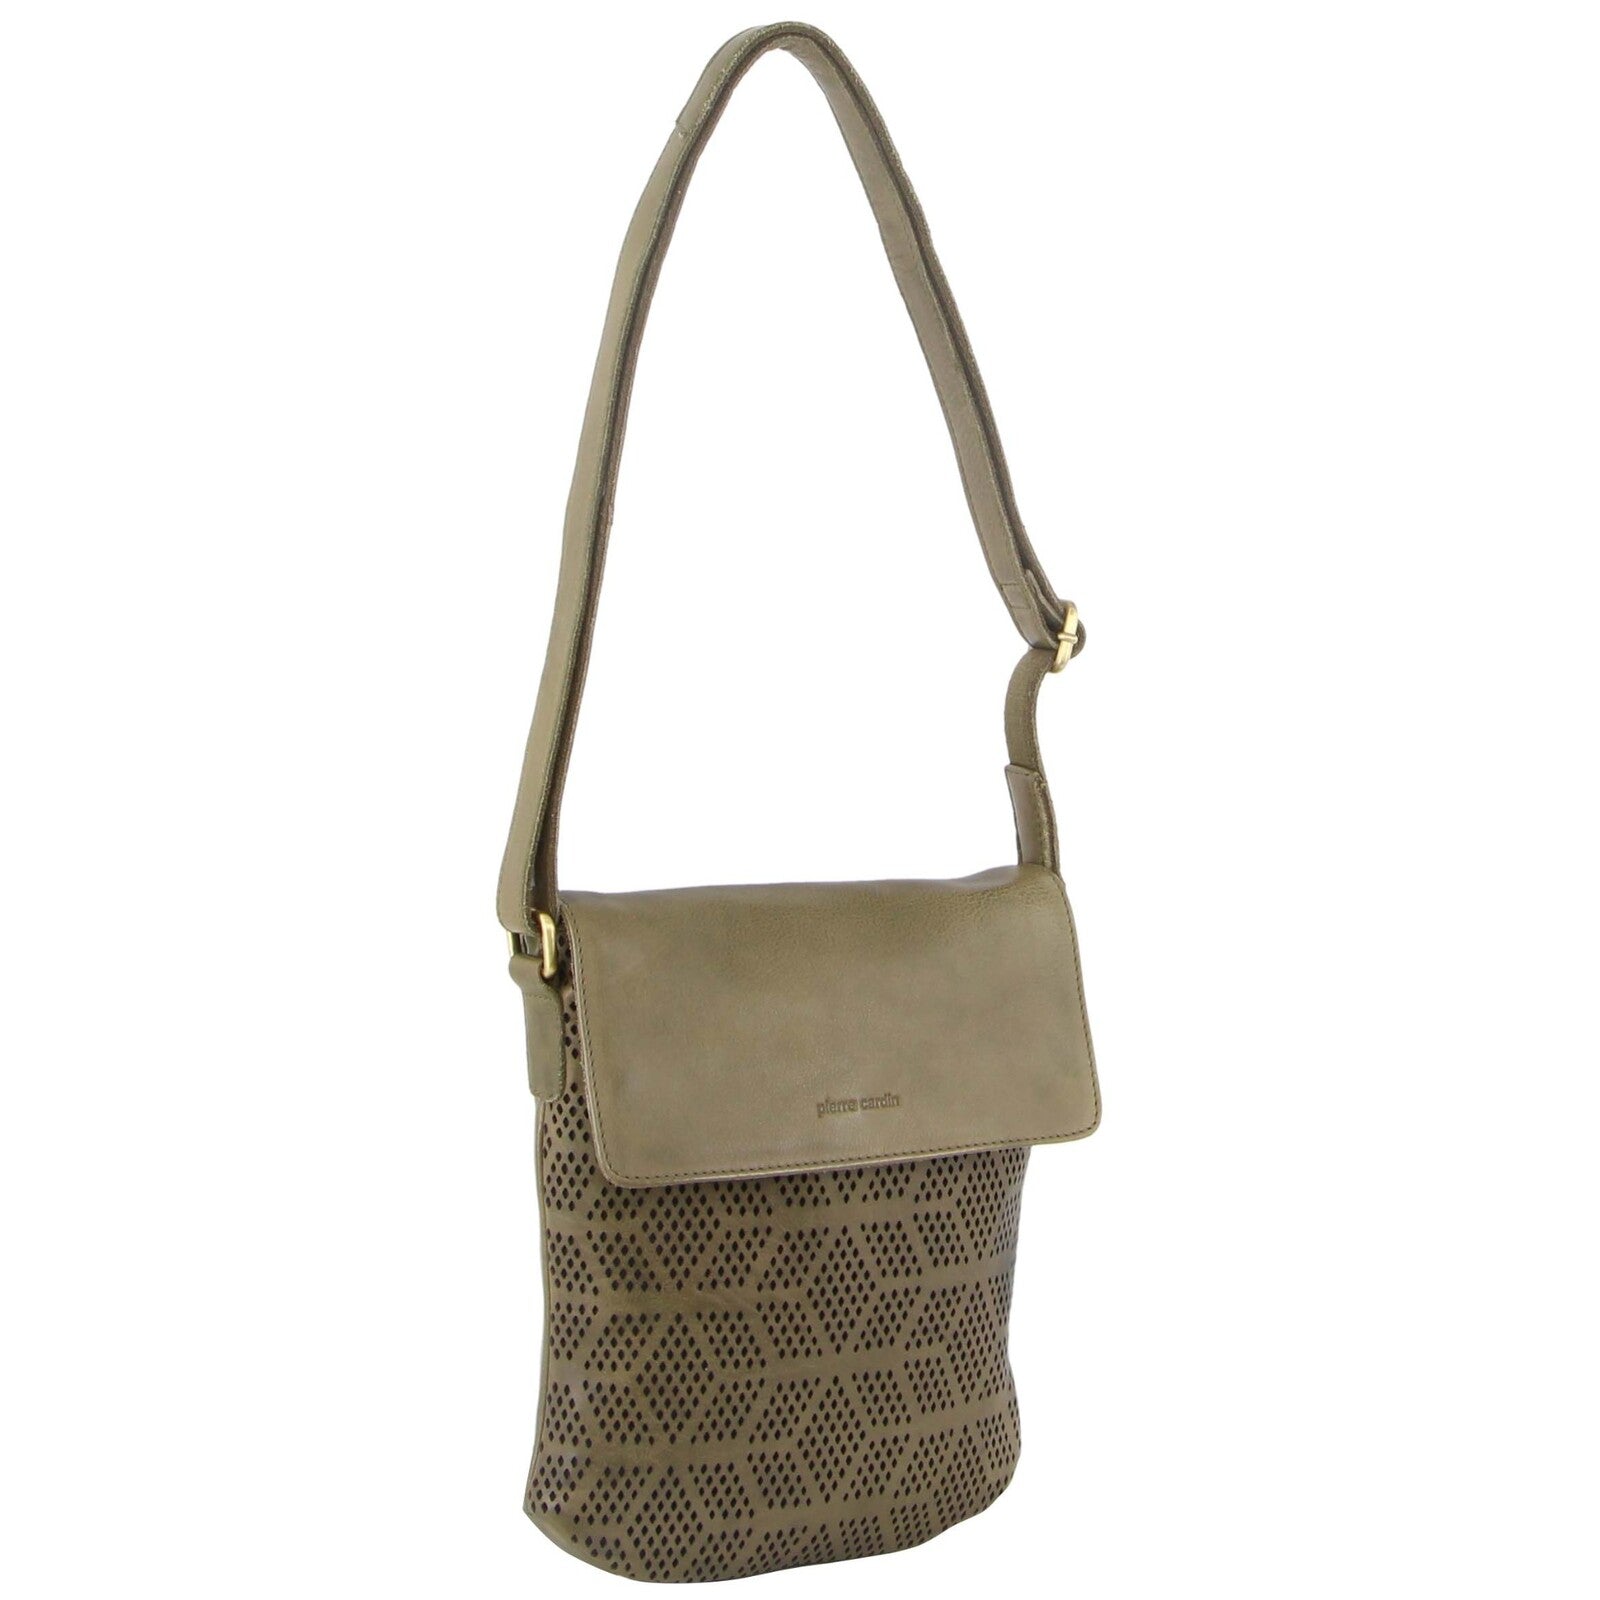 Leather Perforated Cross-Body Bag with Flap Closure - Olive